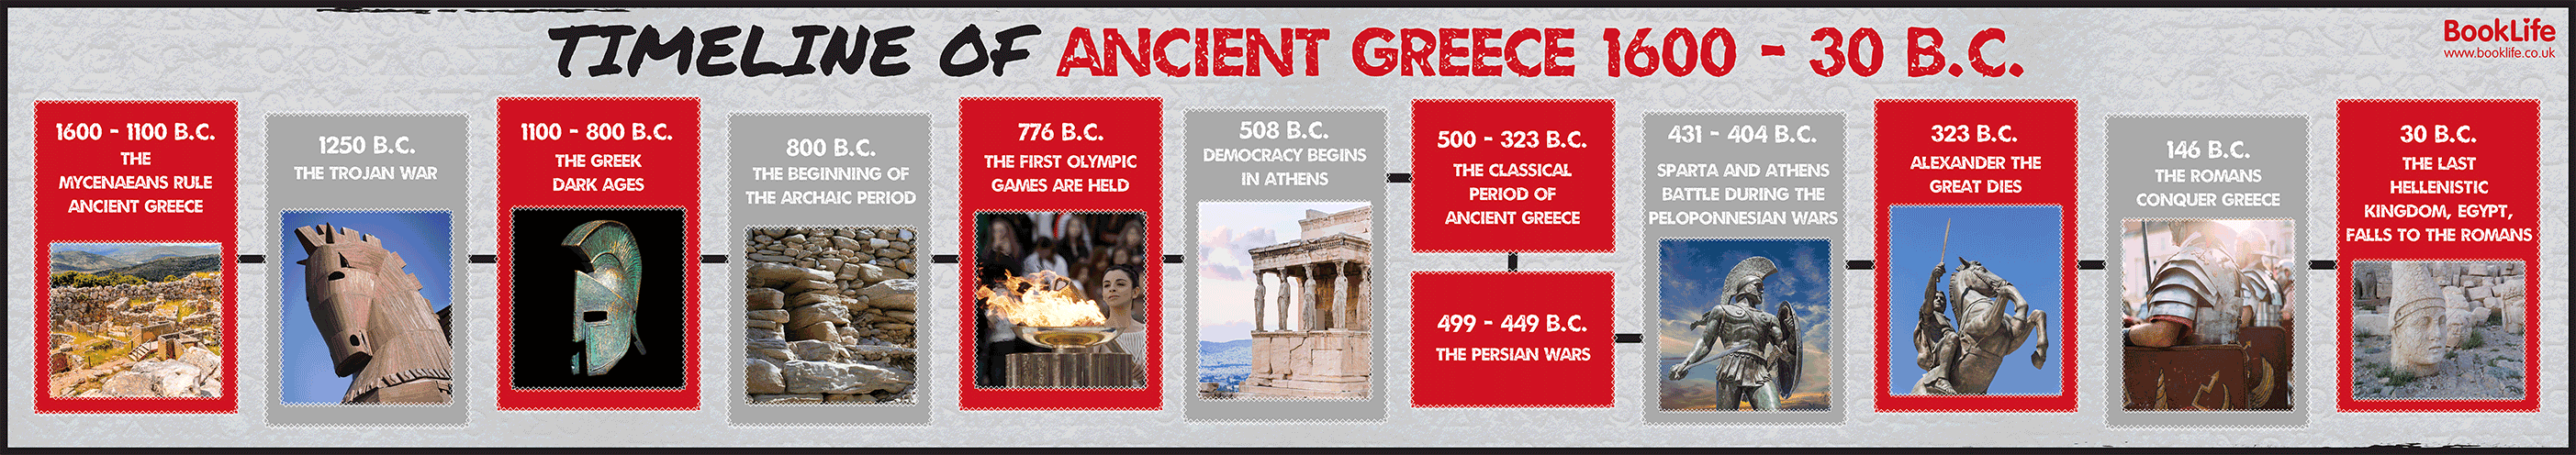 Timeline of Ancient Greece by BookLife